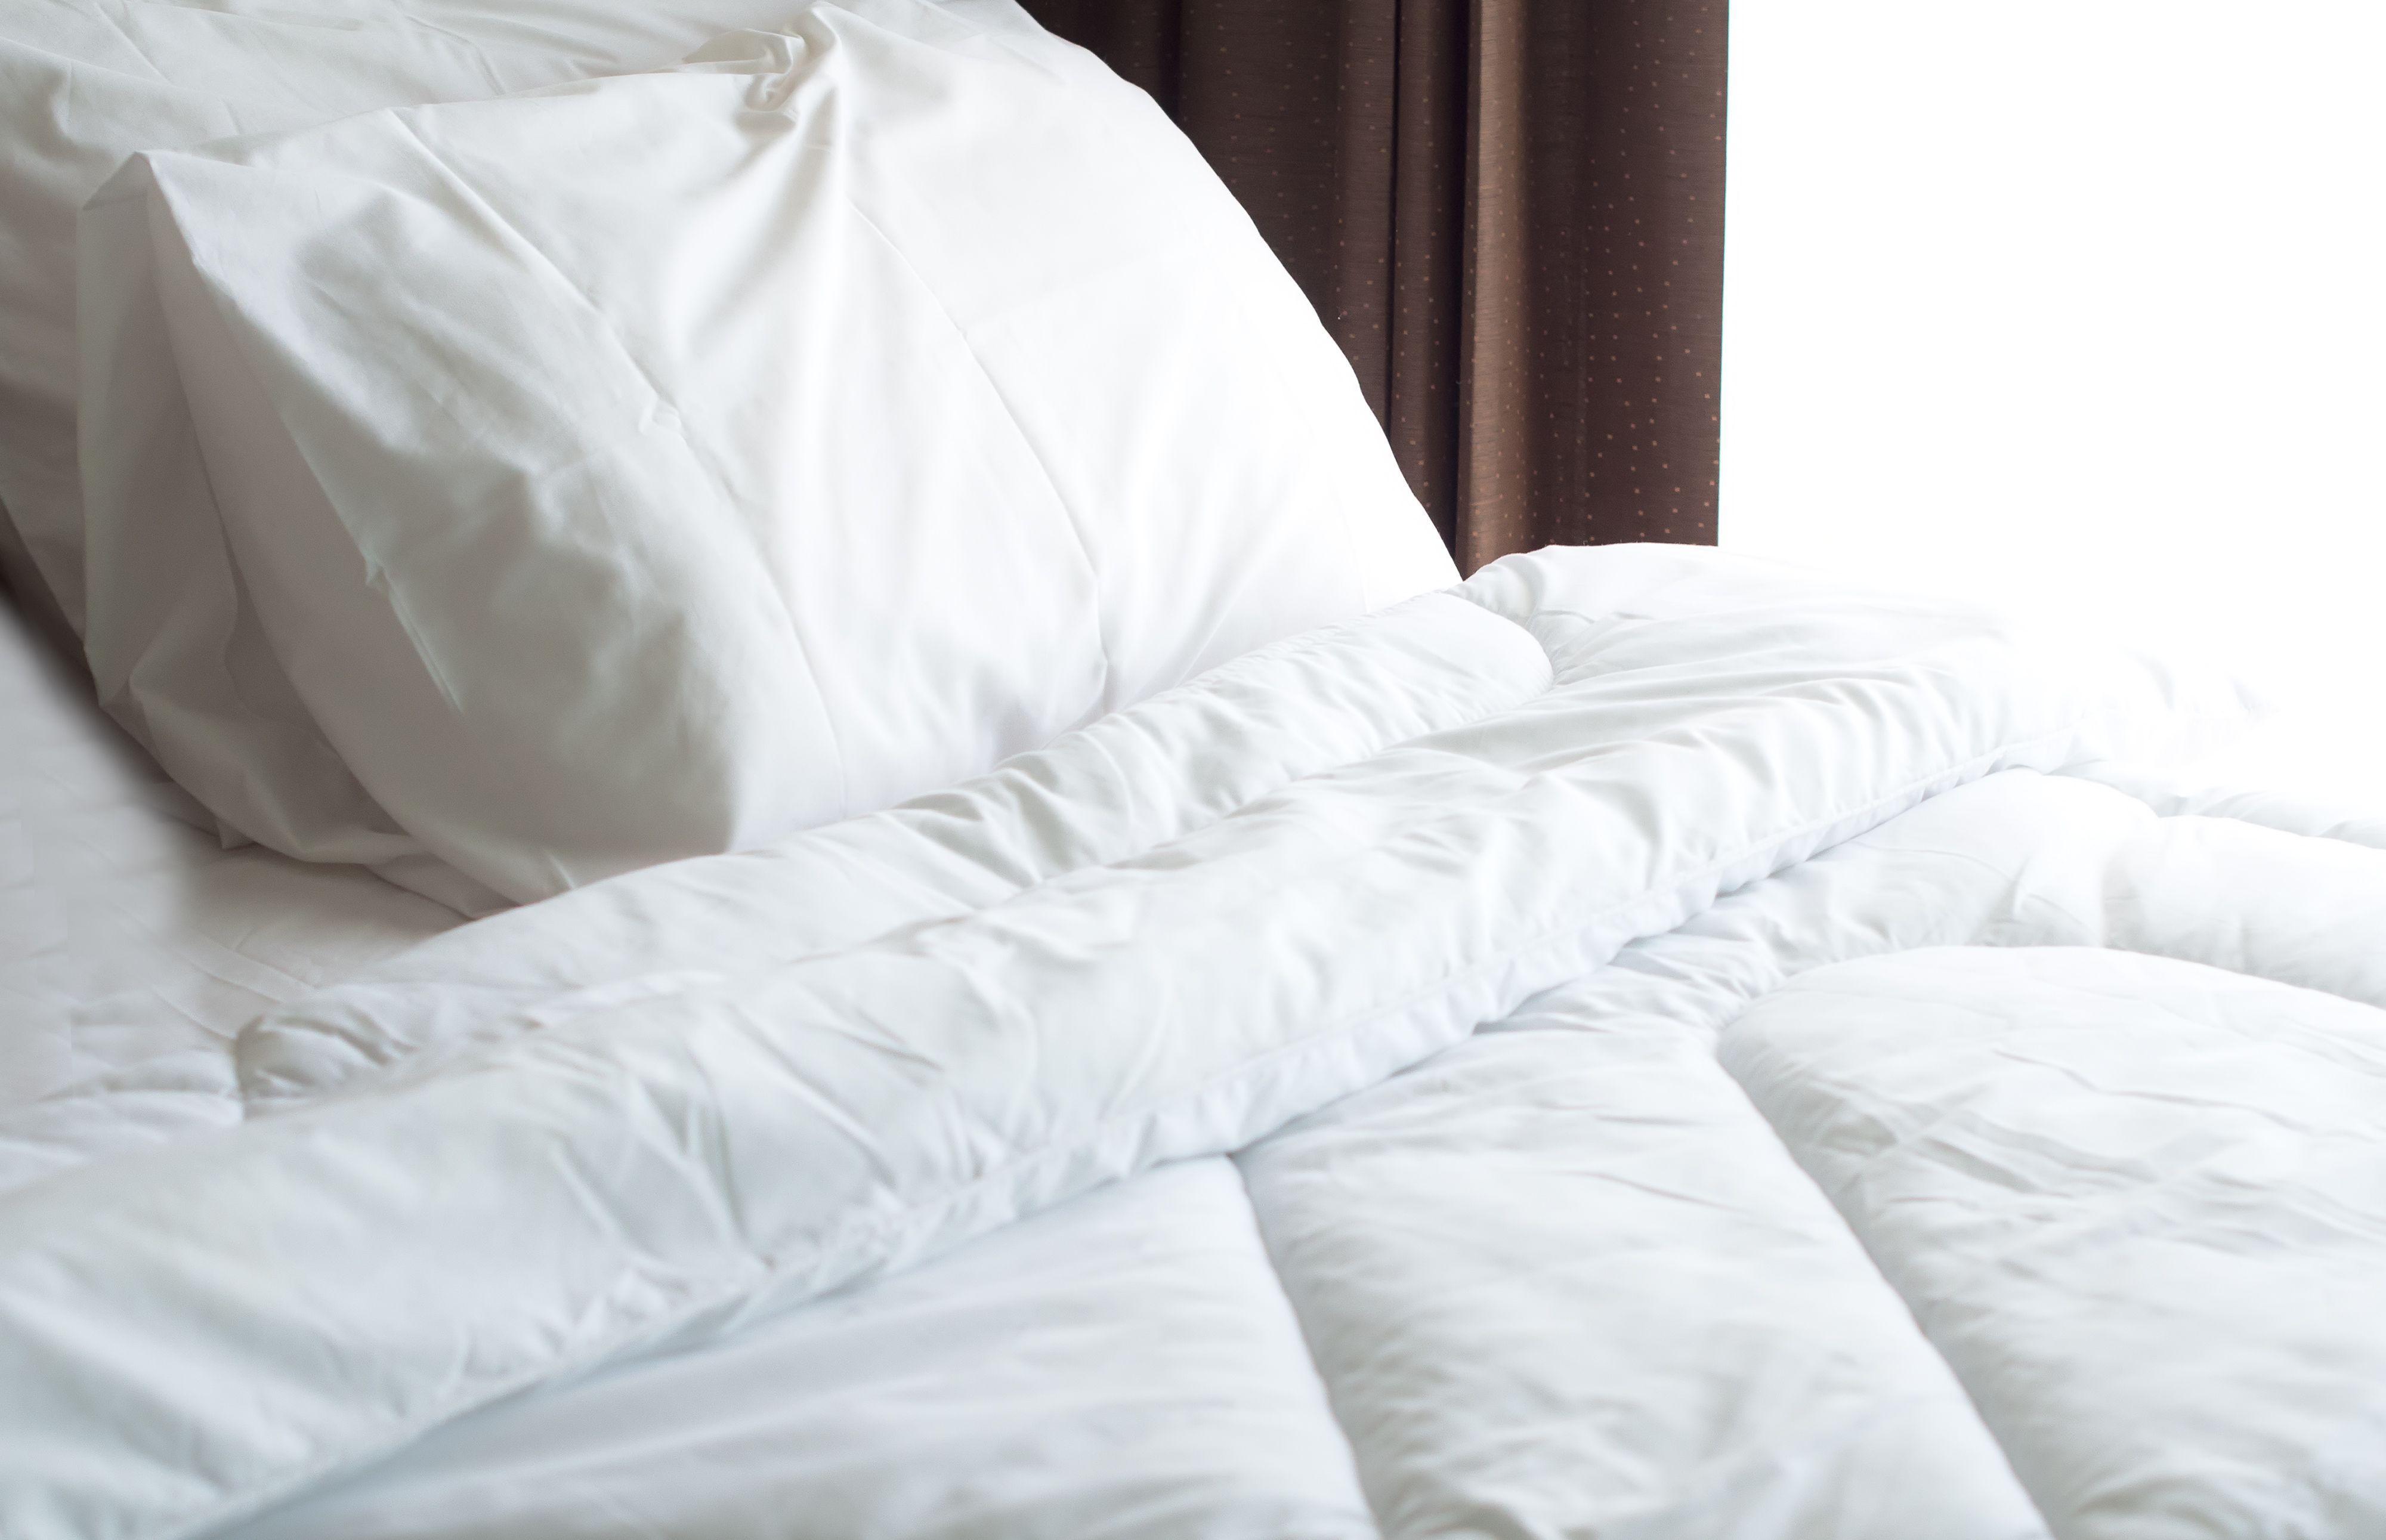 Duvet vs Comforter: Which Is Better? What Is the Difference?